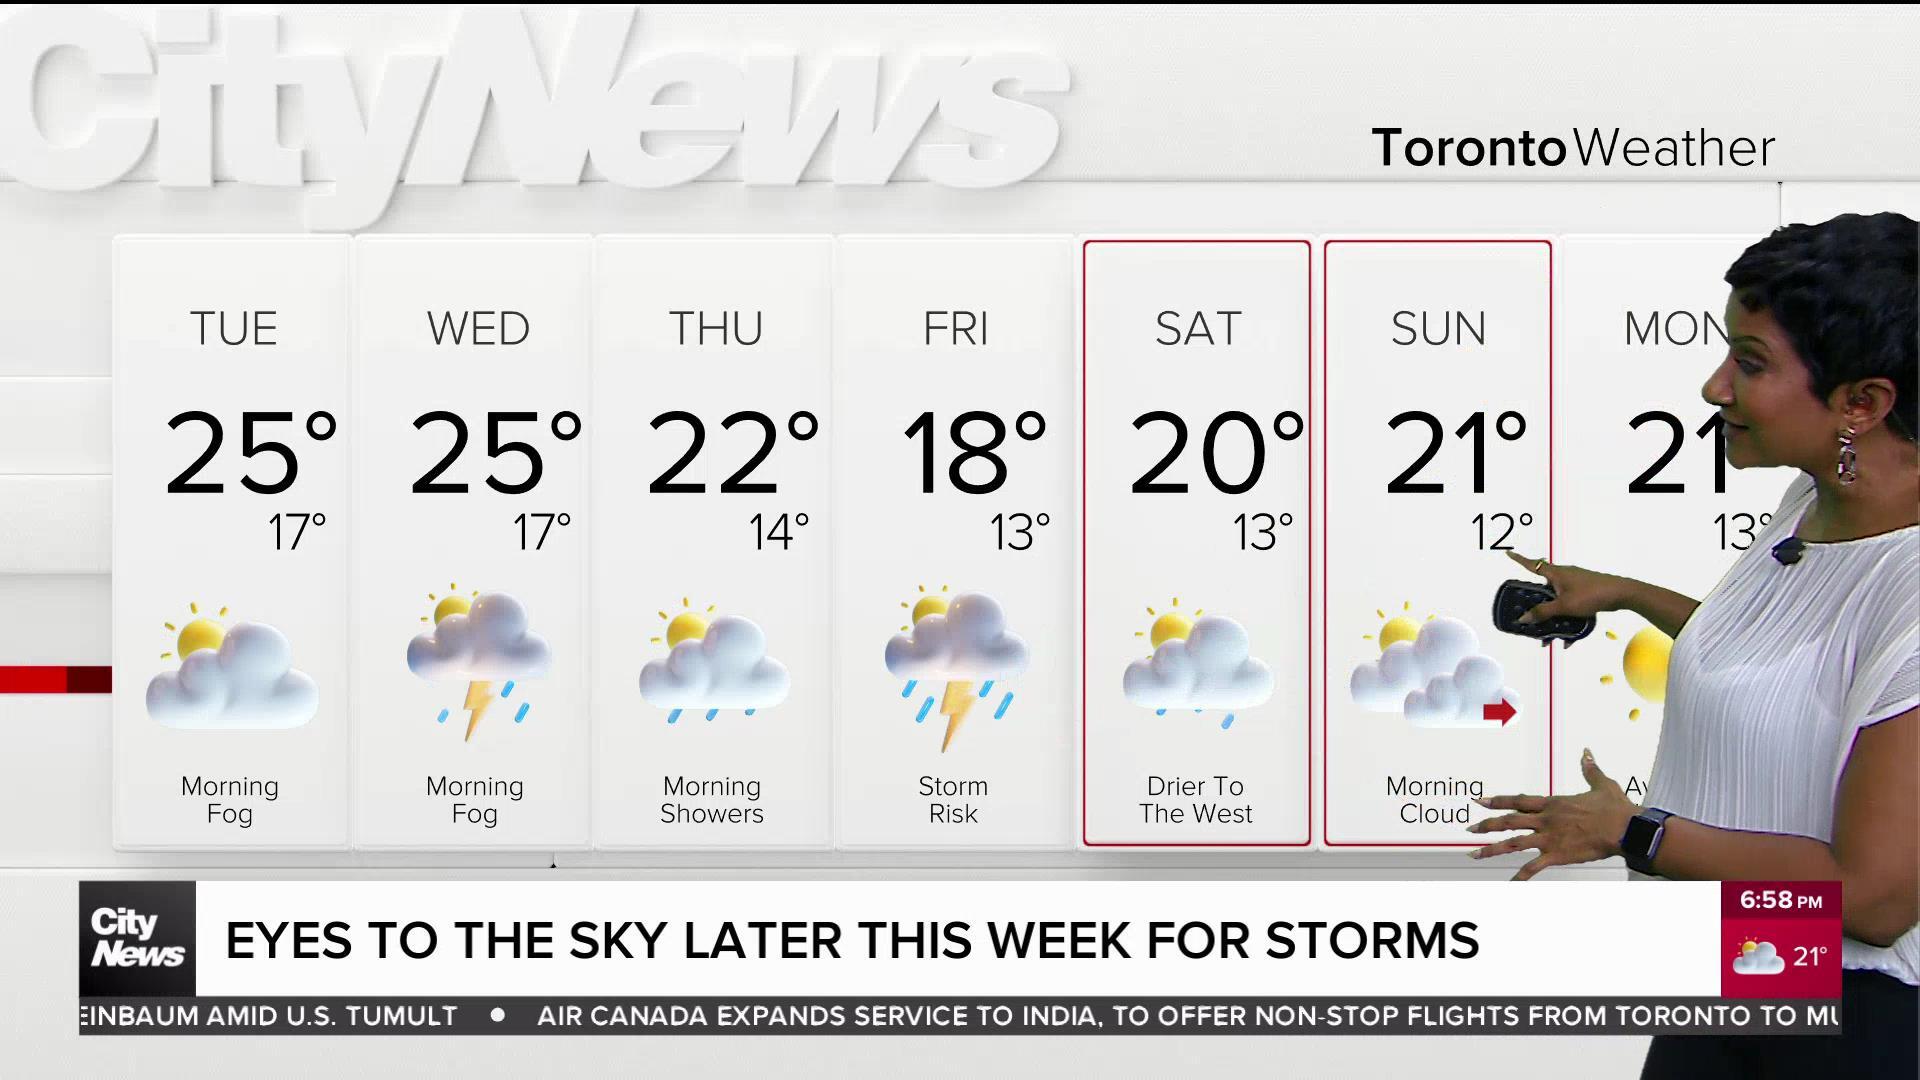 Shower risk later this week in Toronto